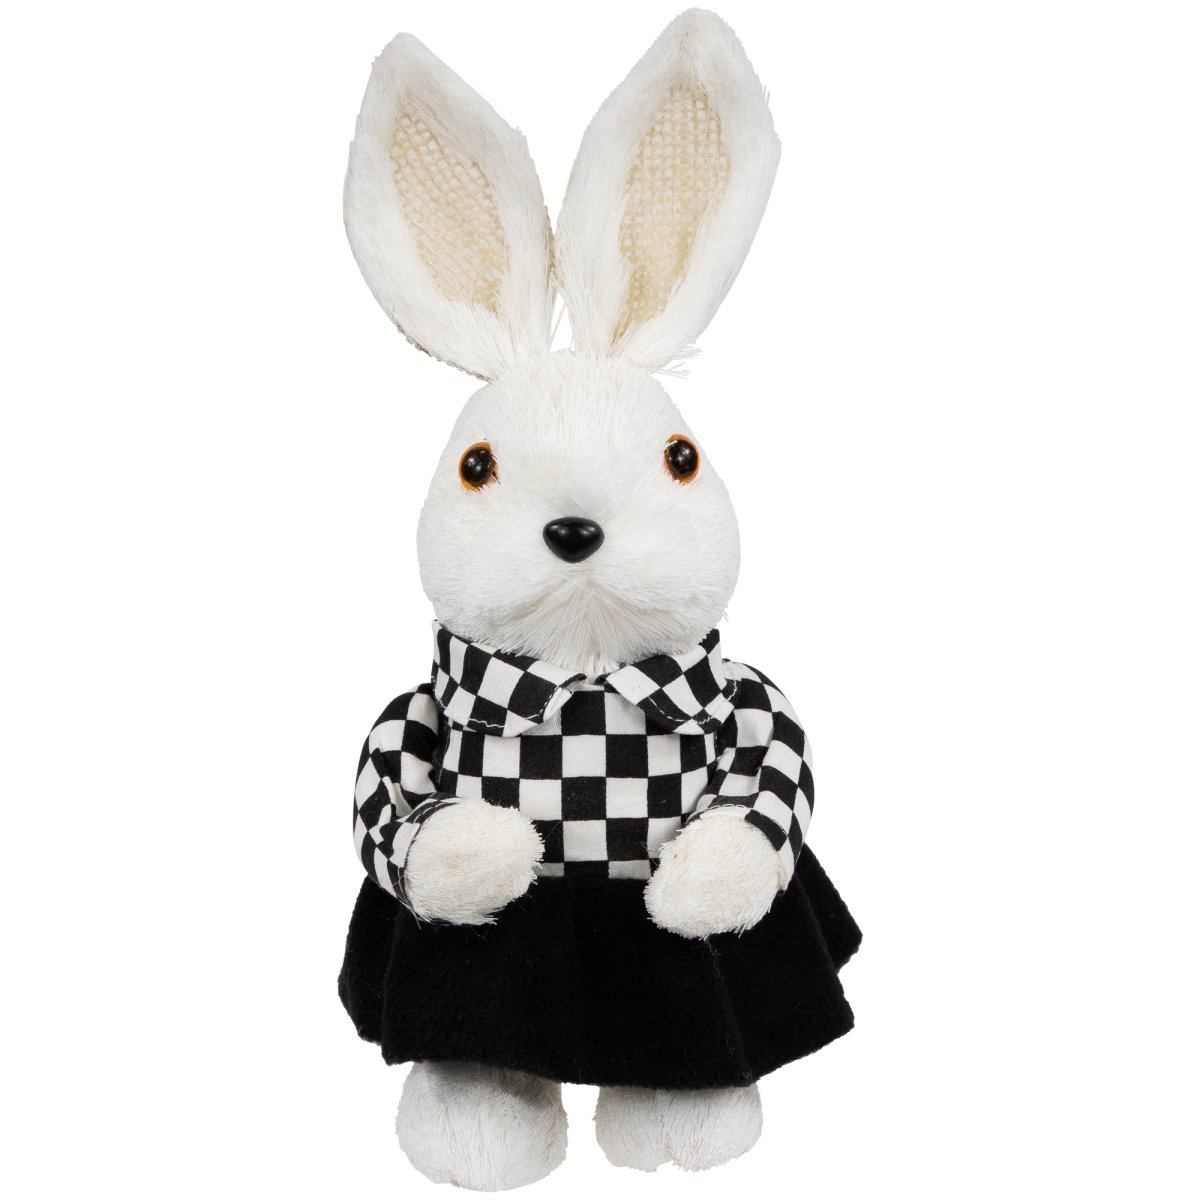 Picture of Northlight 35737350 10 x 4 x 4.25 in. Girl Easter Rabbit Figurine in Checkered Dress